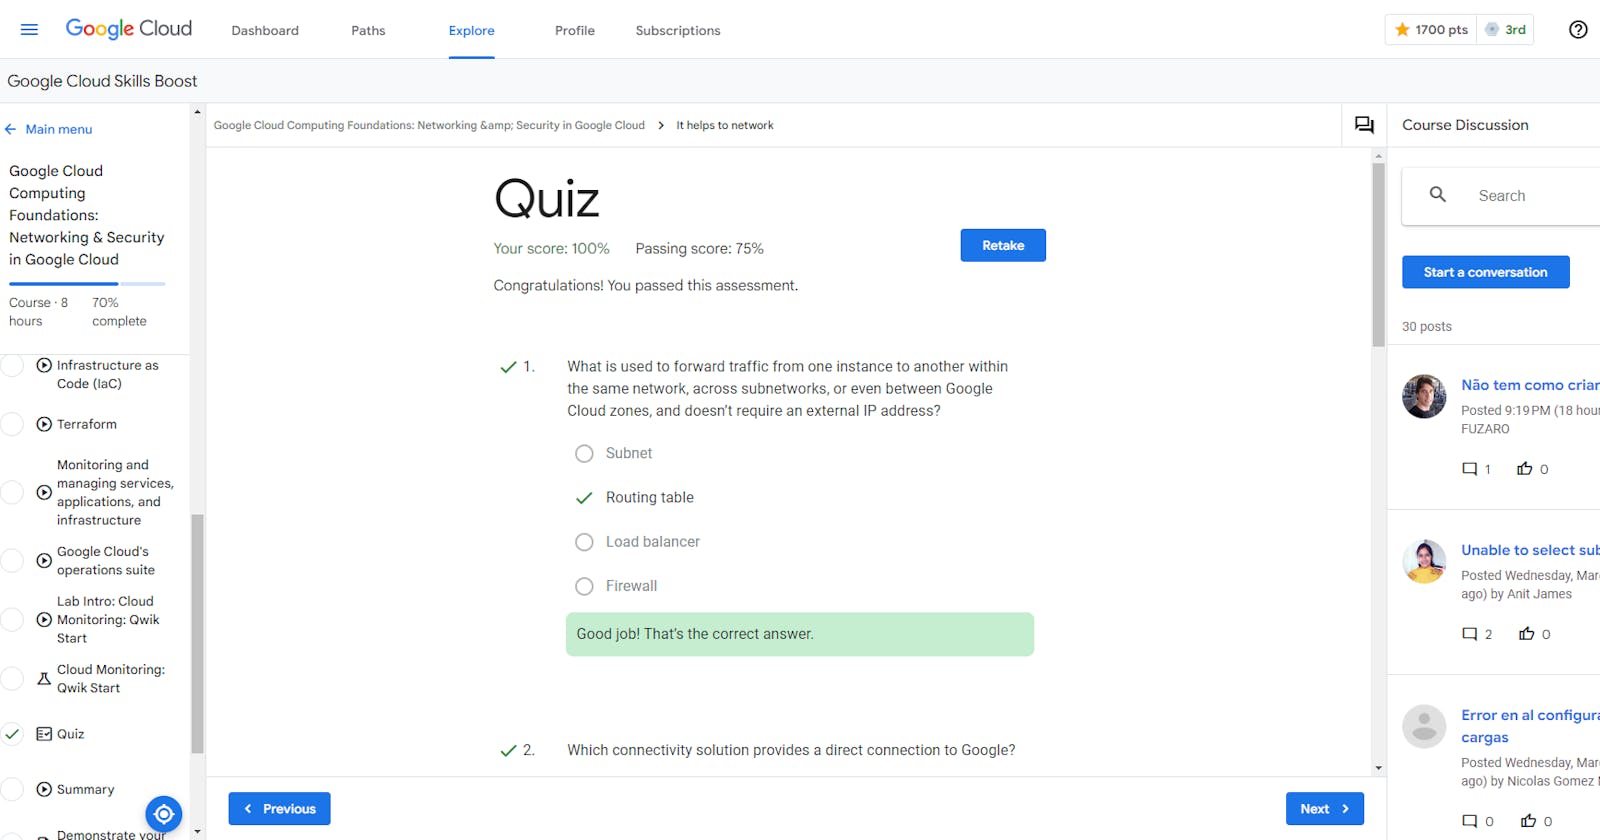 Google Cloud Computing Foundations: Networking & Security in Google Cloud - Quiz